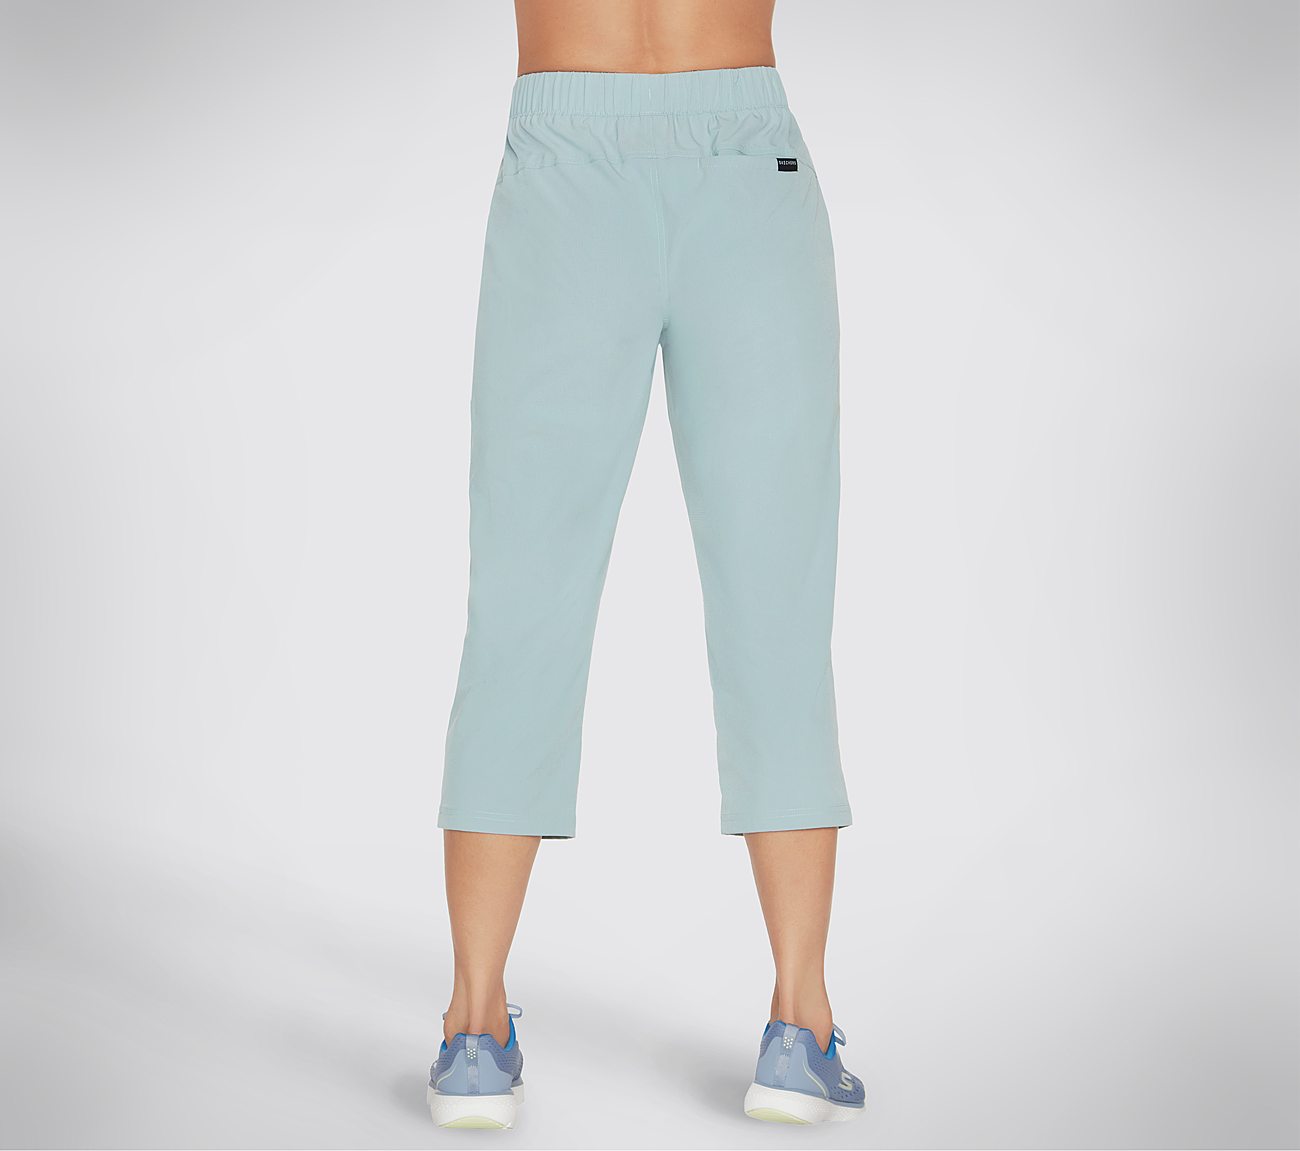 INCLINE MIDCALF PANT, LIGHT GREY/BLUE Apparels Top View